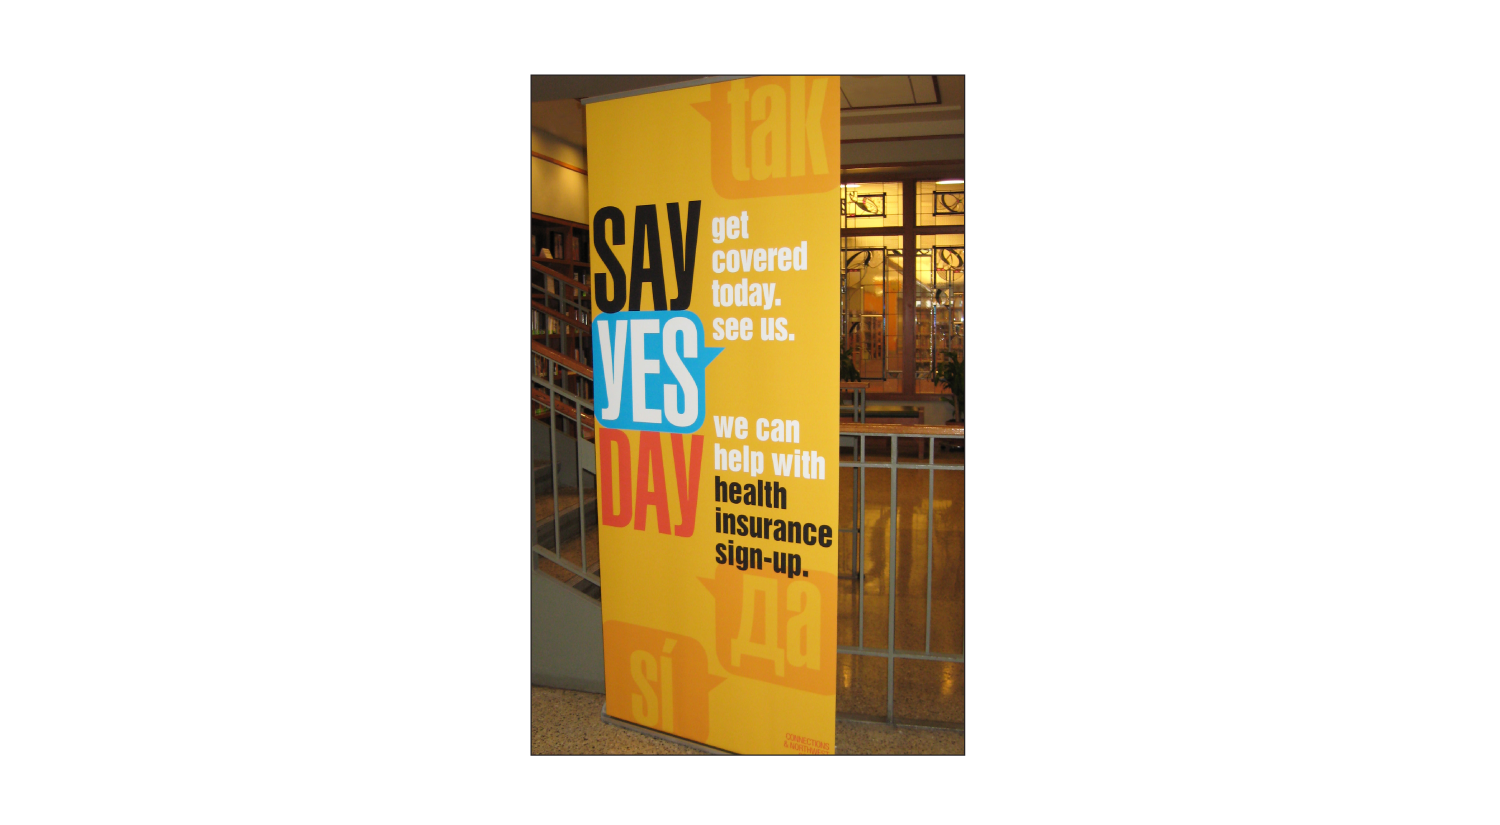 messagegallery-getcovered-4.png